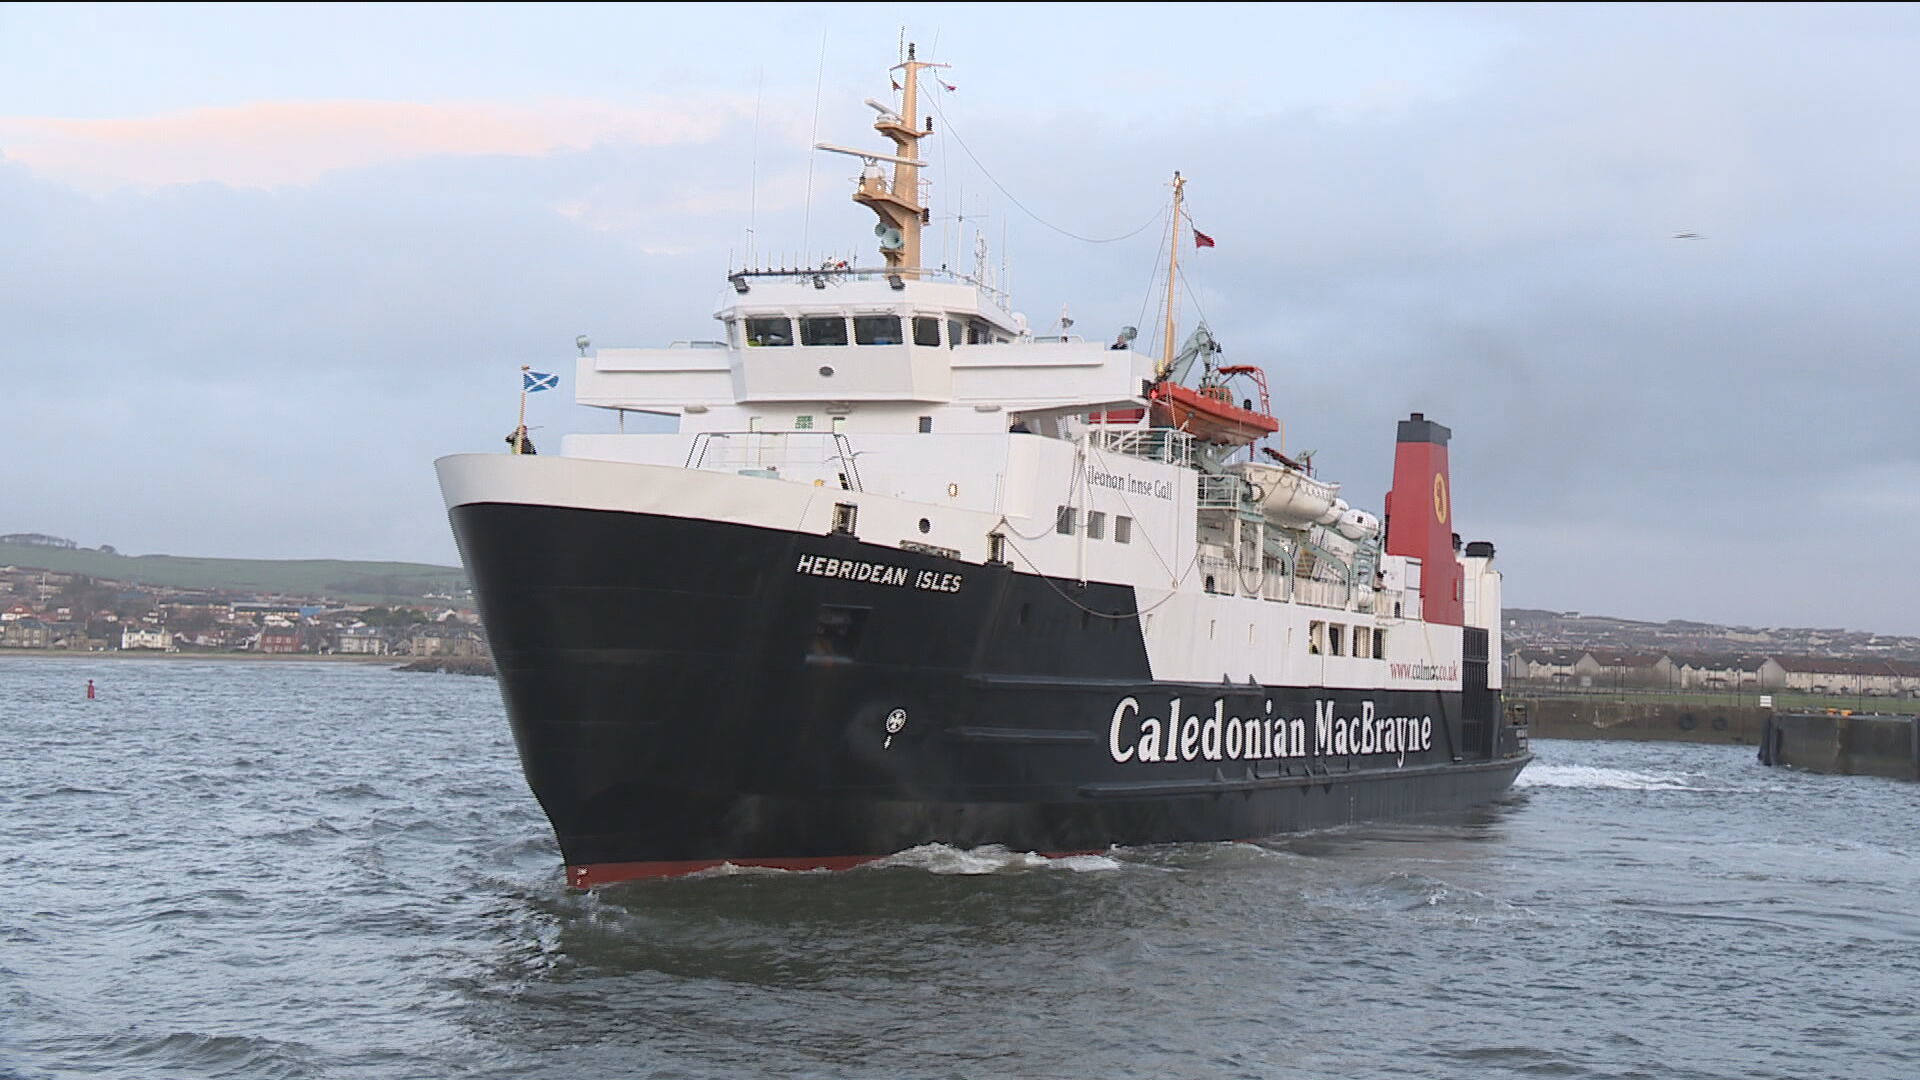 Islanders have seen persistent disruption to Scotland's ferry network.